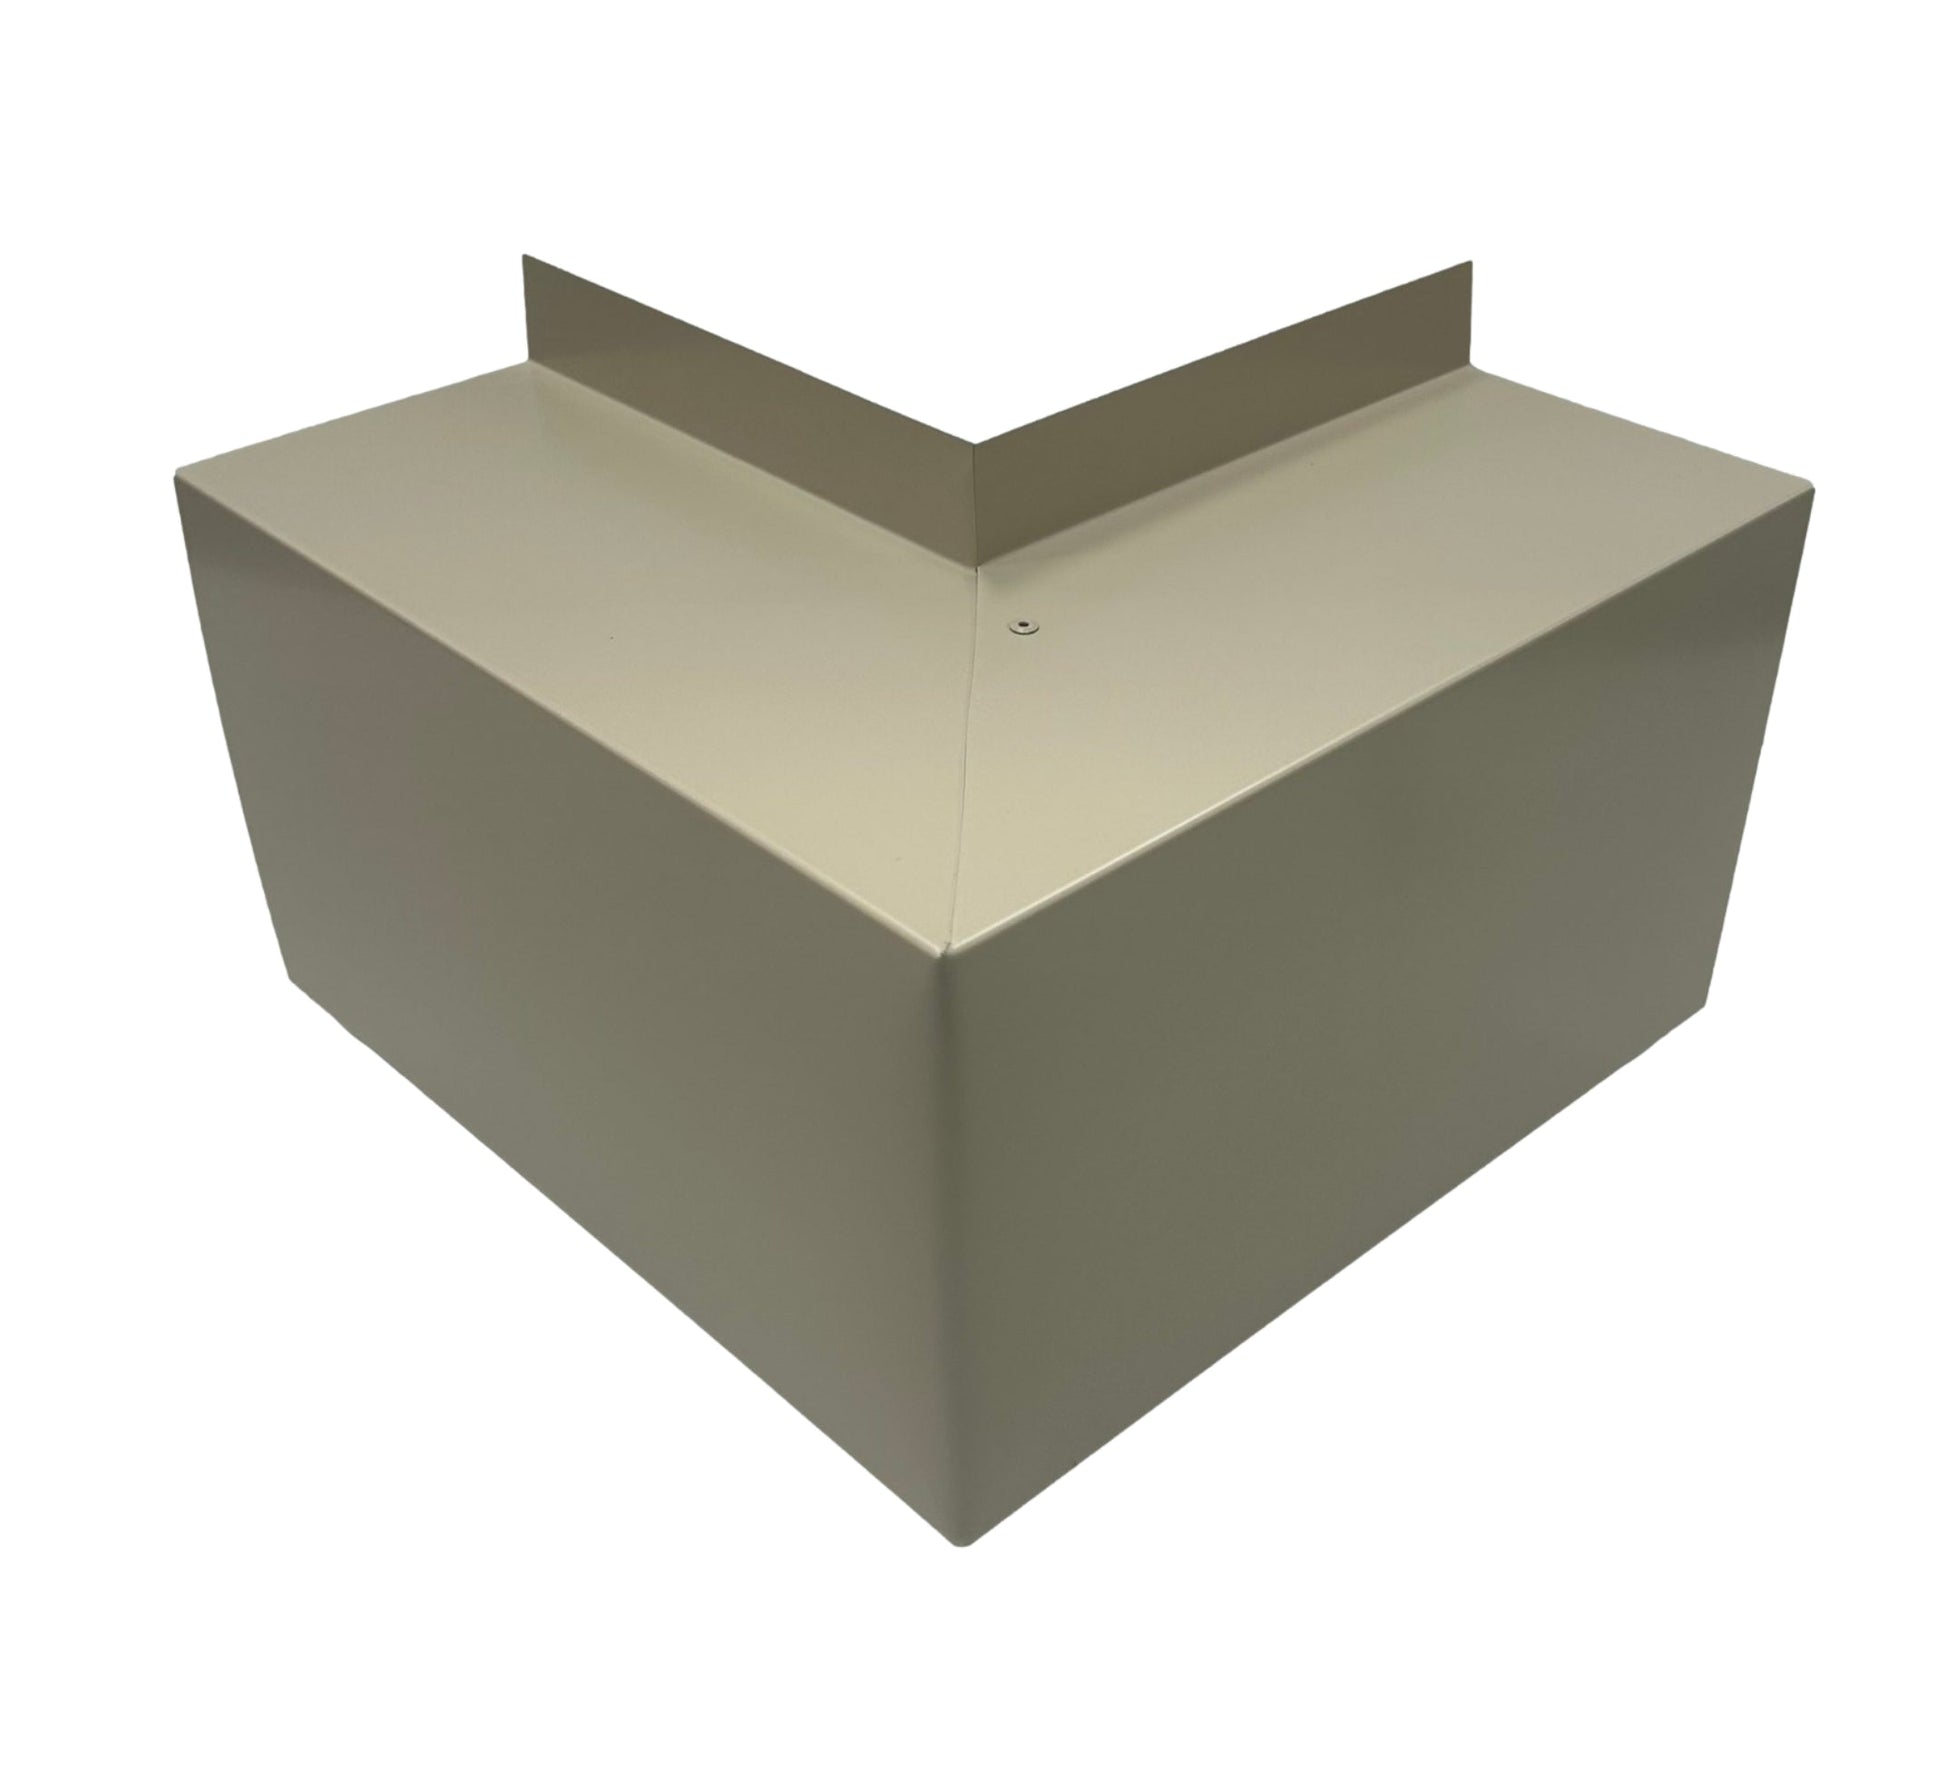 A beige, metal, V-shaped corner guard with sharp edges and a smooth surface. The Perma Cover Residential Series - Line Set Cover Outside Corner Elbows - Premium Quality product is designed to fit securely at the corner of a wall, offering protection against damage. It features simple and easy installation and is photographed against a plain white background.